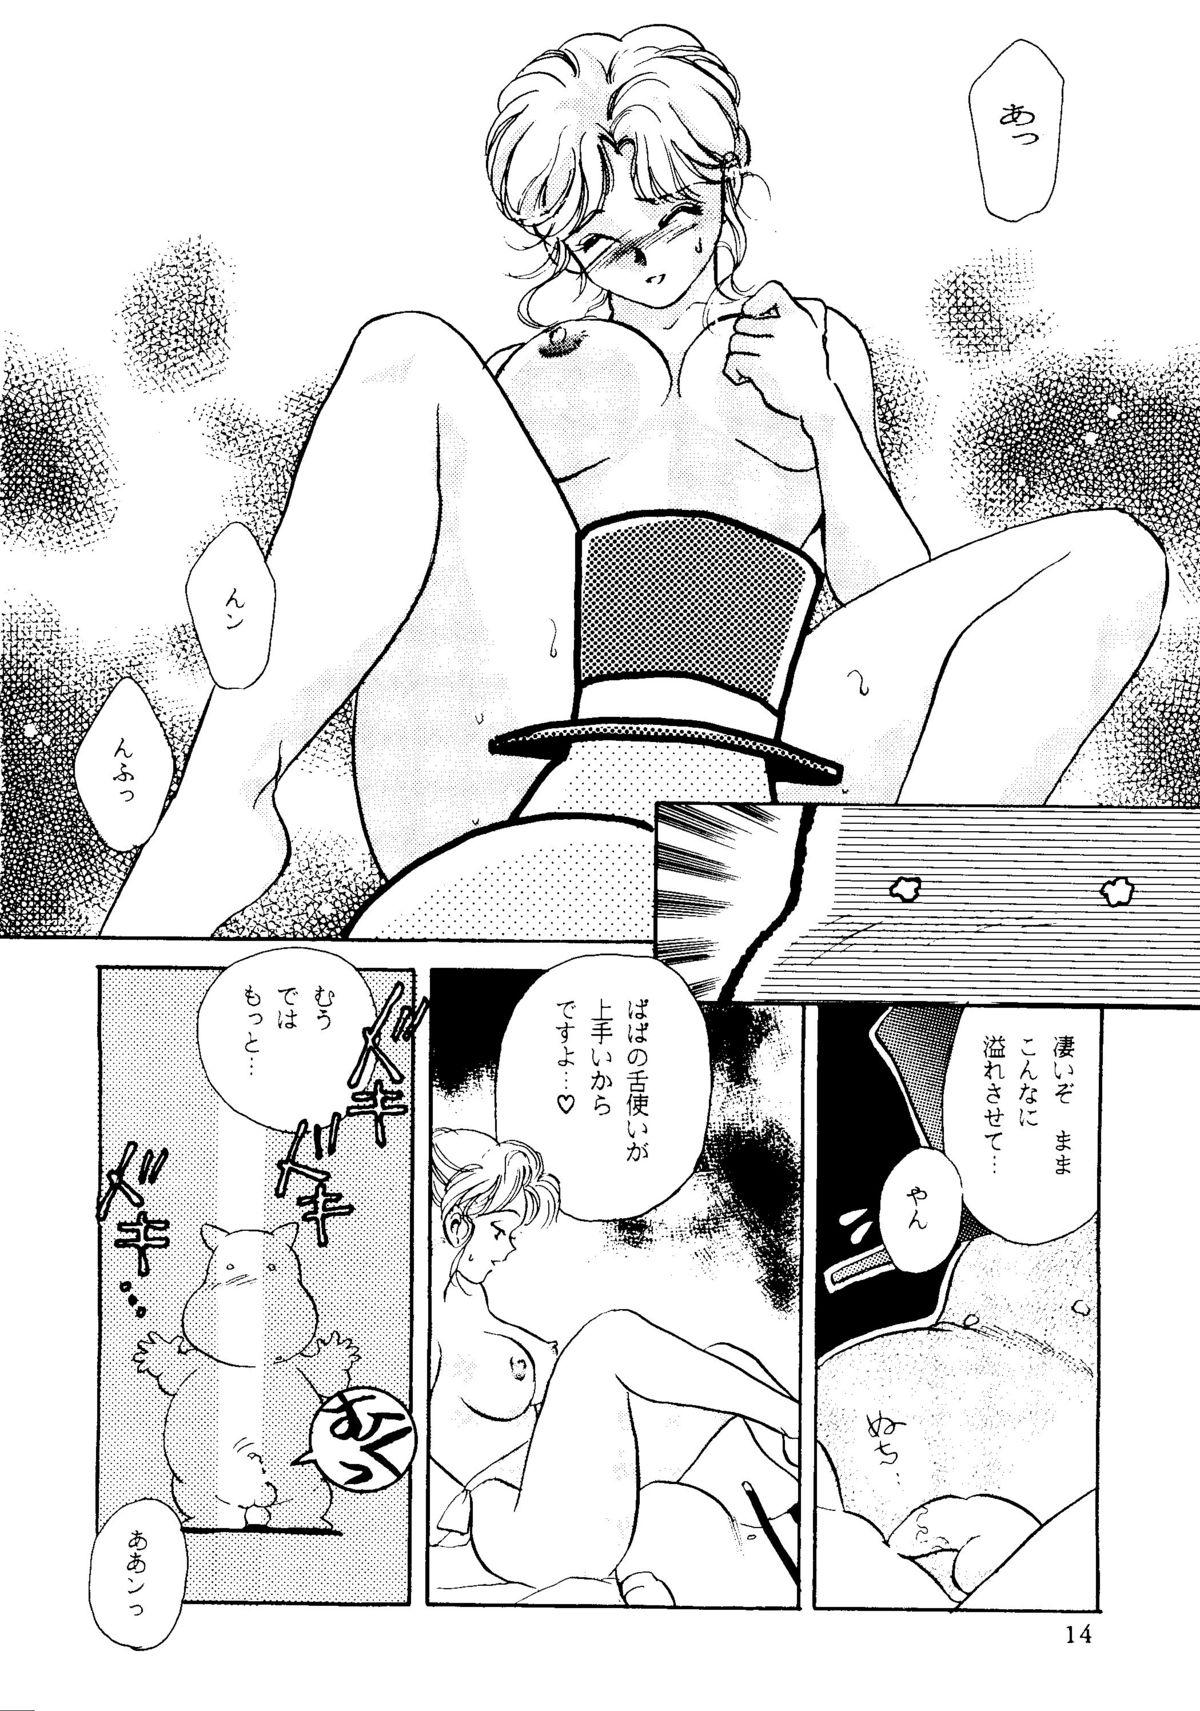 Asslicking R KIDS! Vol. 8 - Sailor moon Street fighter Tenchi muyo Red baron Gay - Page 10